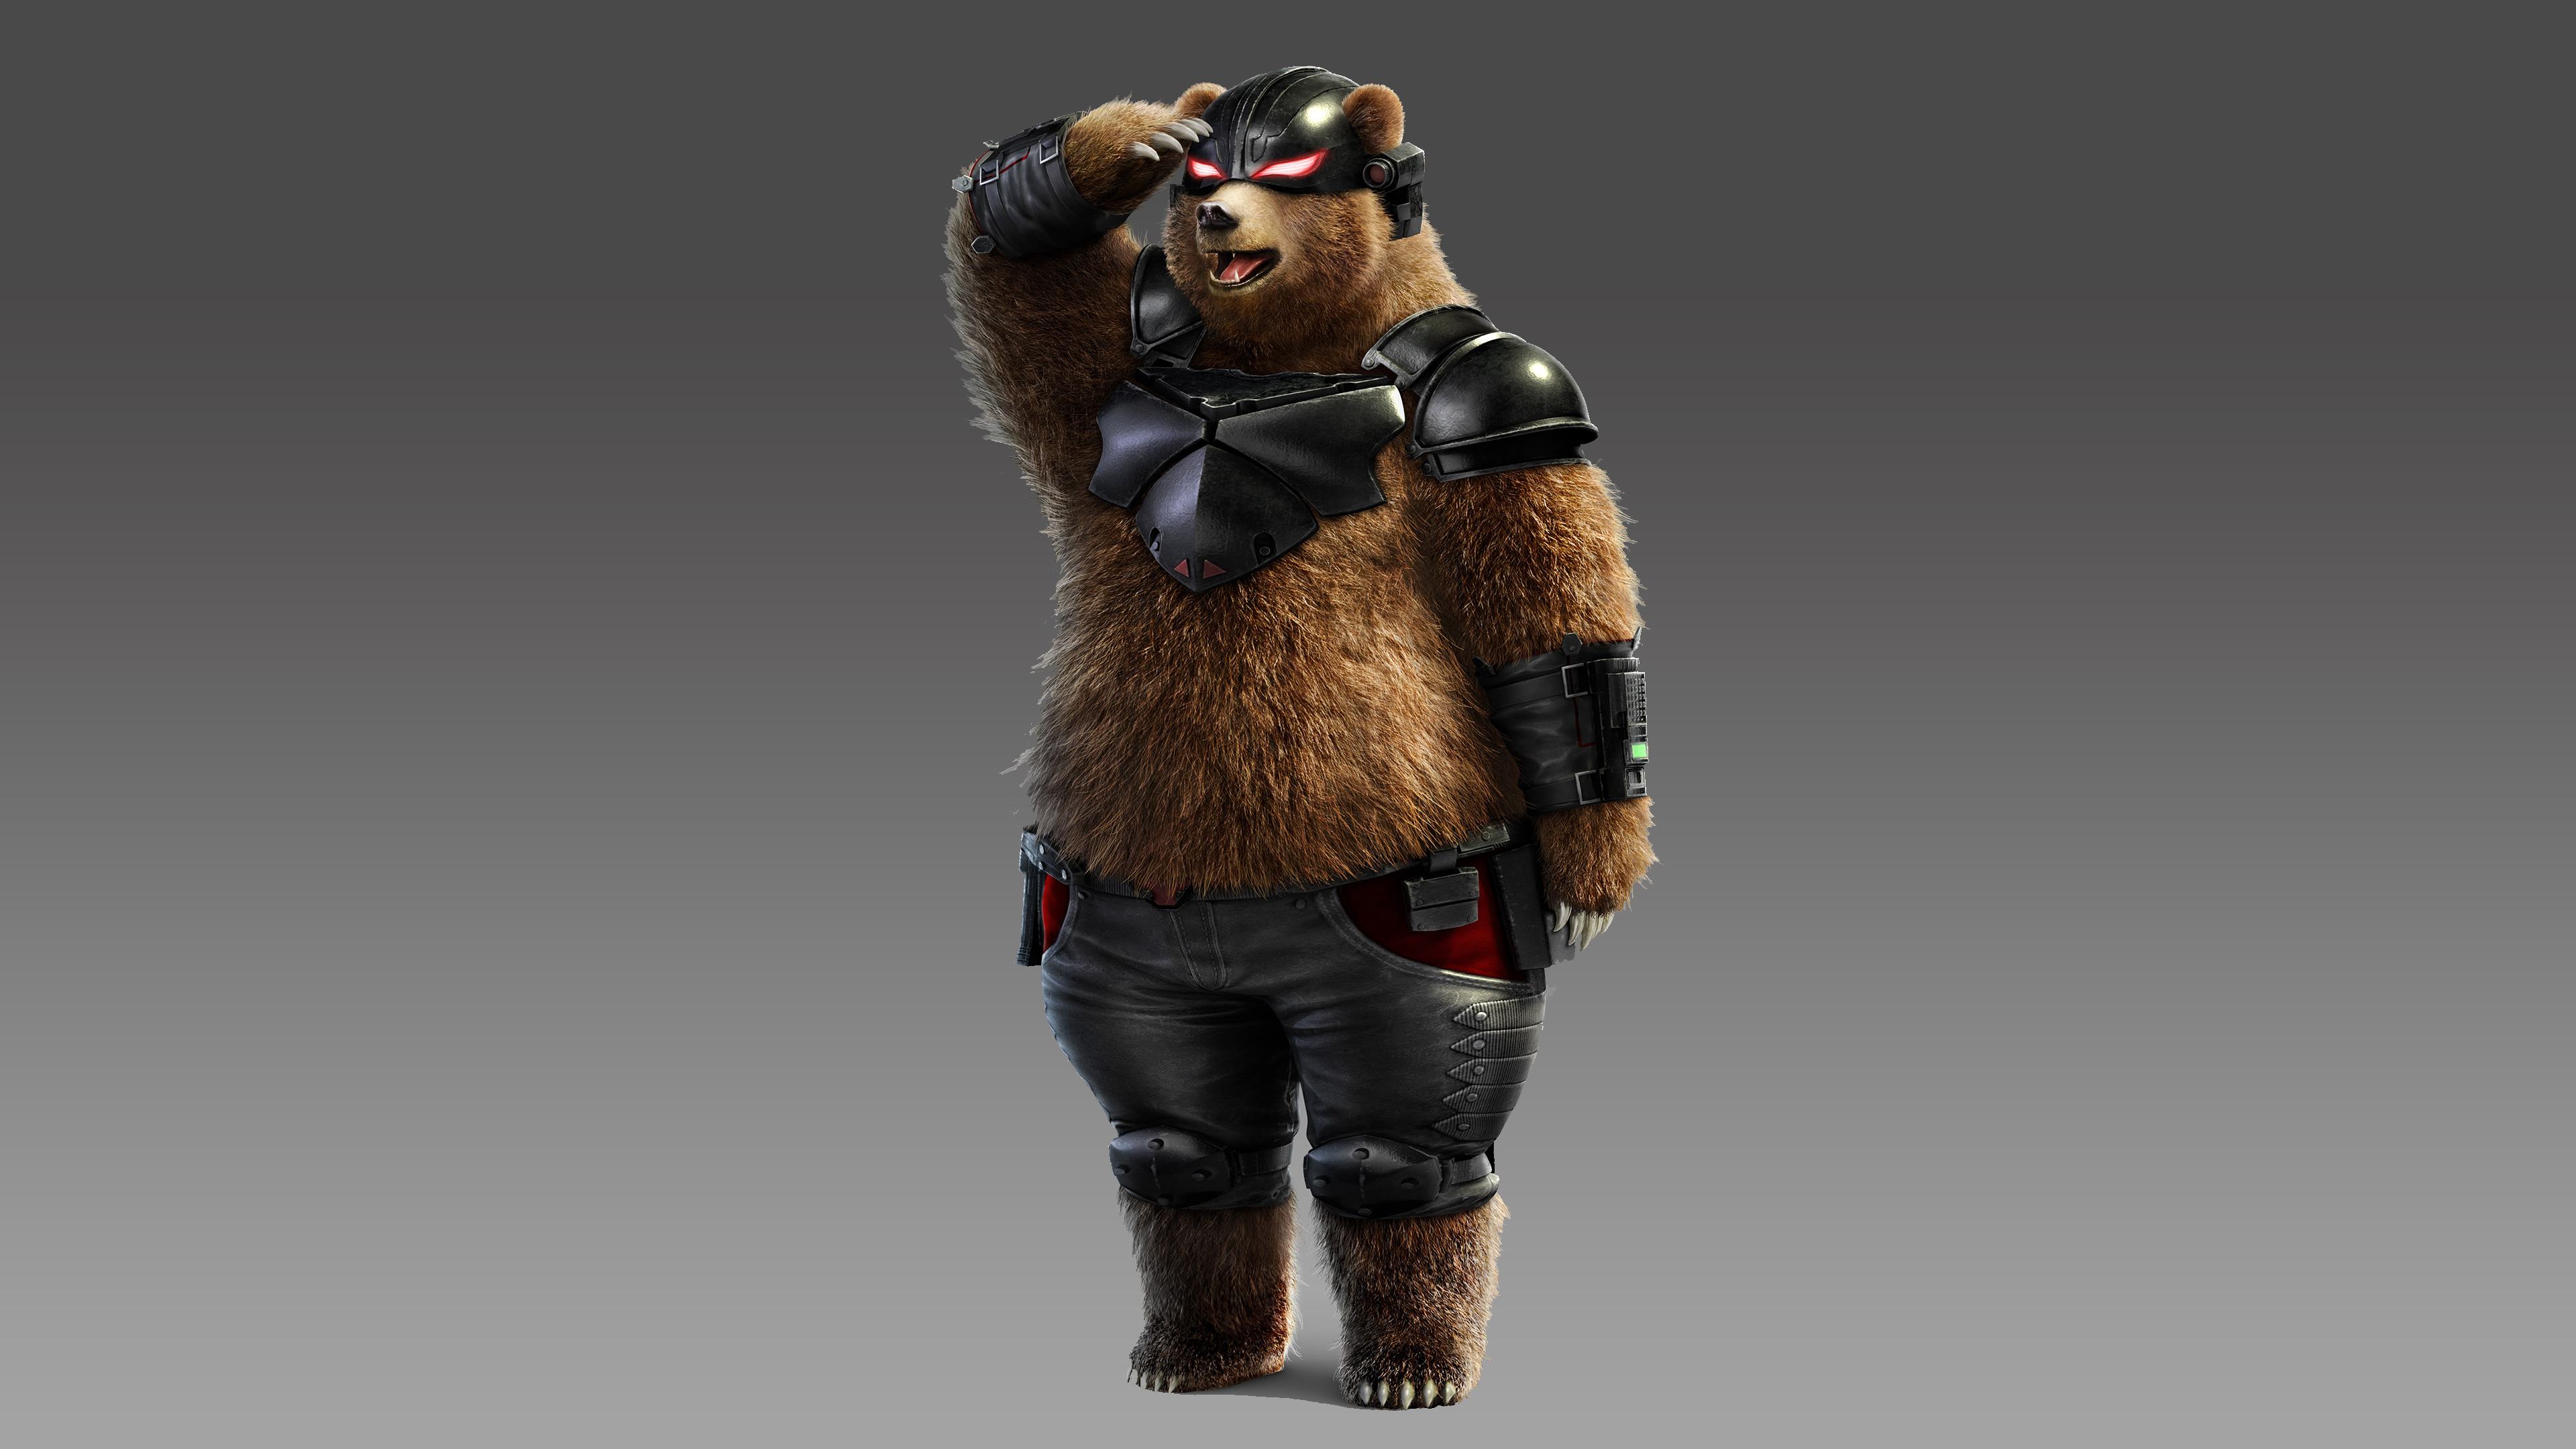 I couldn't imagine using another costume for Kuma.